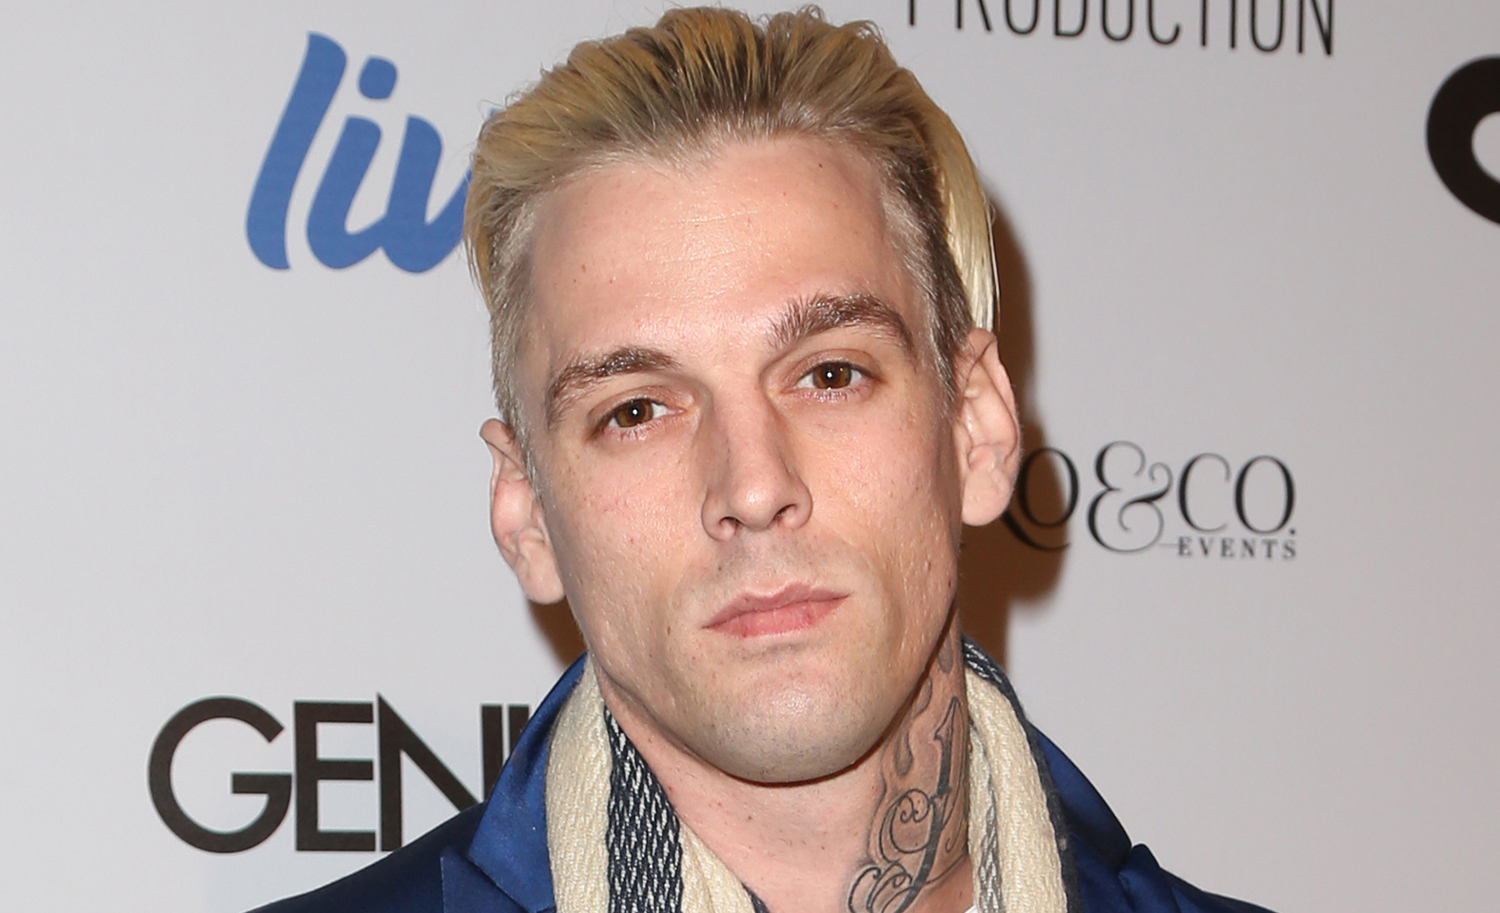 Aaron Carter Announces His Bisexuality